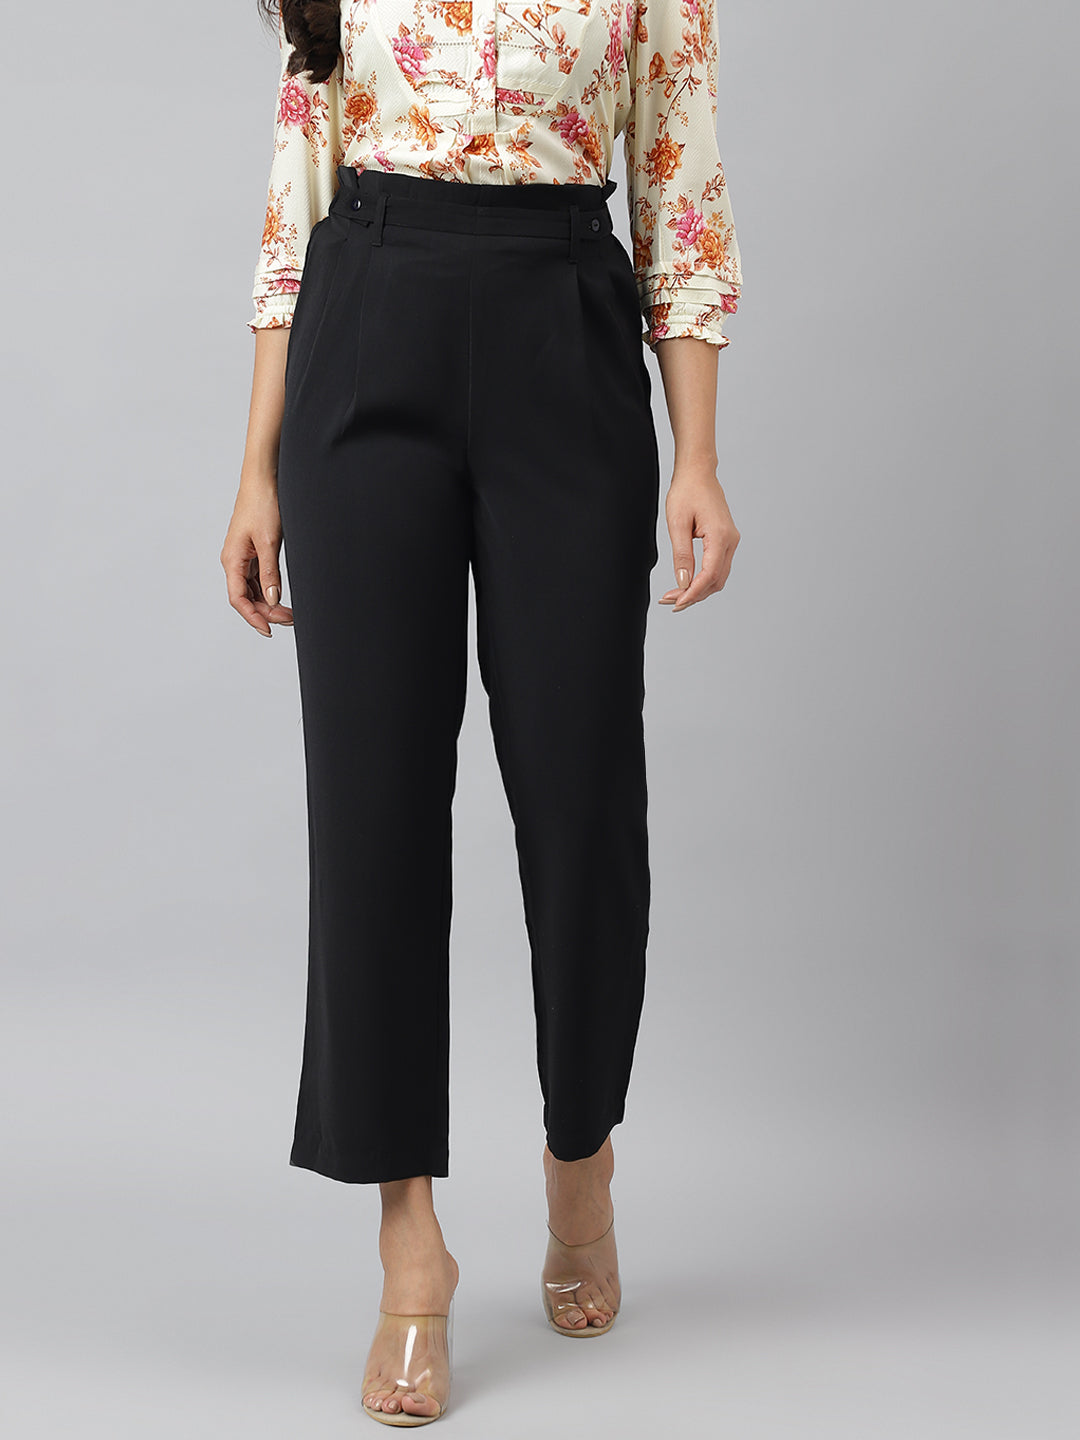 Black Solid Ankle Length Pant With Pocket